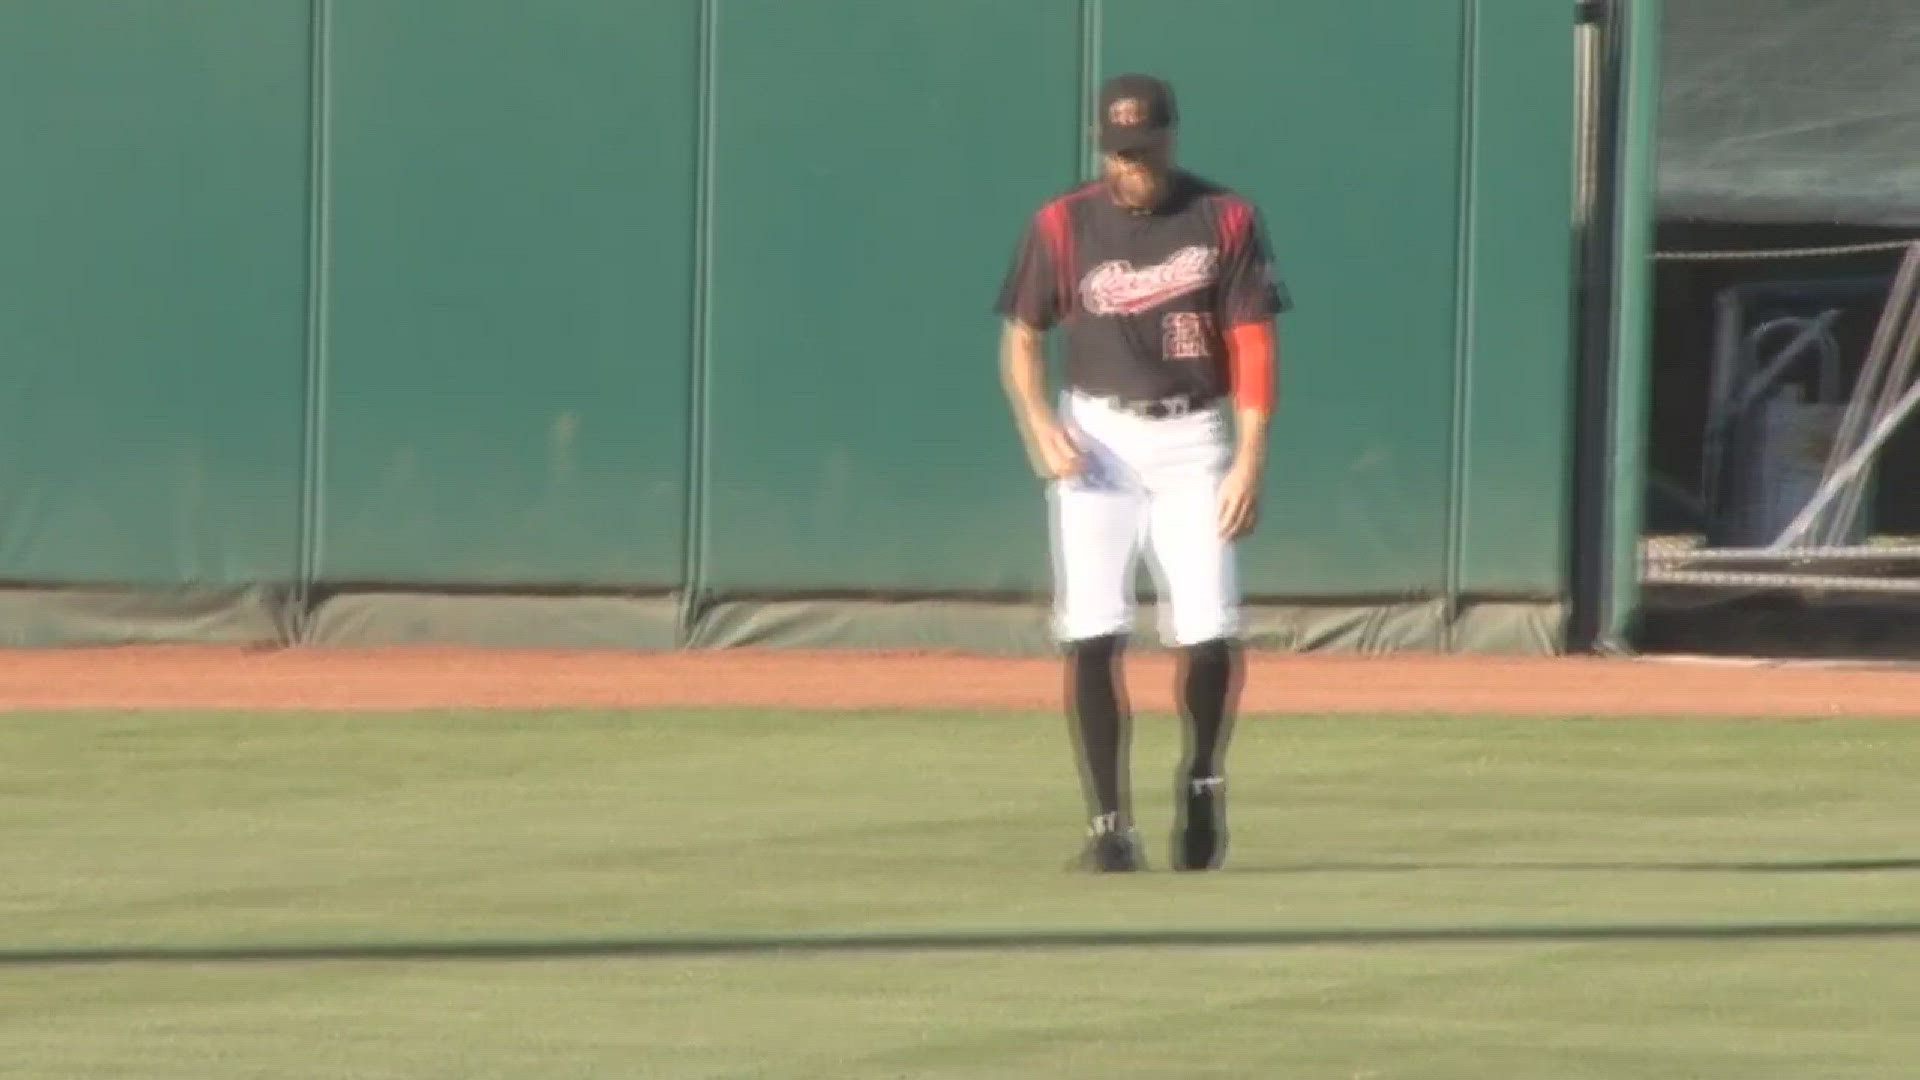 San Francisco Giants star Hunter Pence talks about his rehabilitation appearance in West Sacramento with the River Cats, attempting to return from hamstring surgery, his road to recovery and playing at Raley Field.